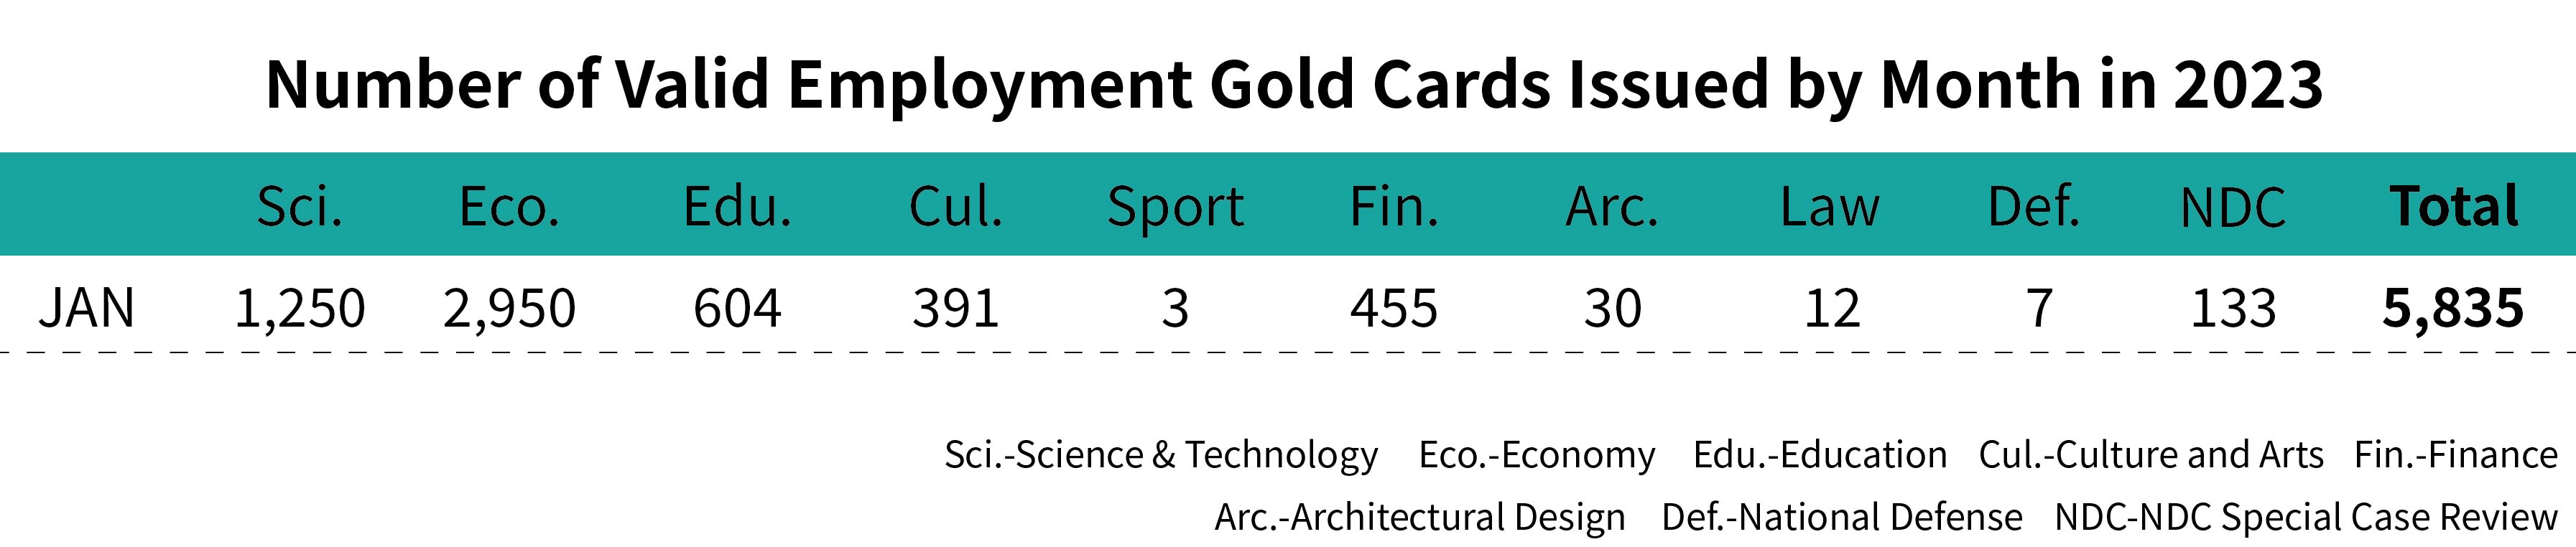 Number of Valid Employment Gold Cards Issued by Month-January